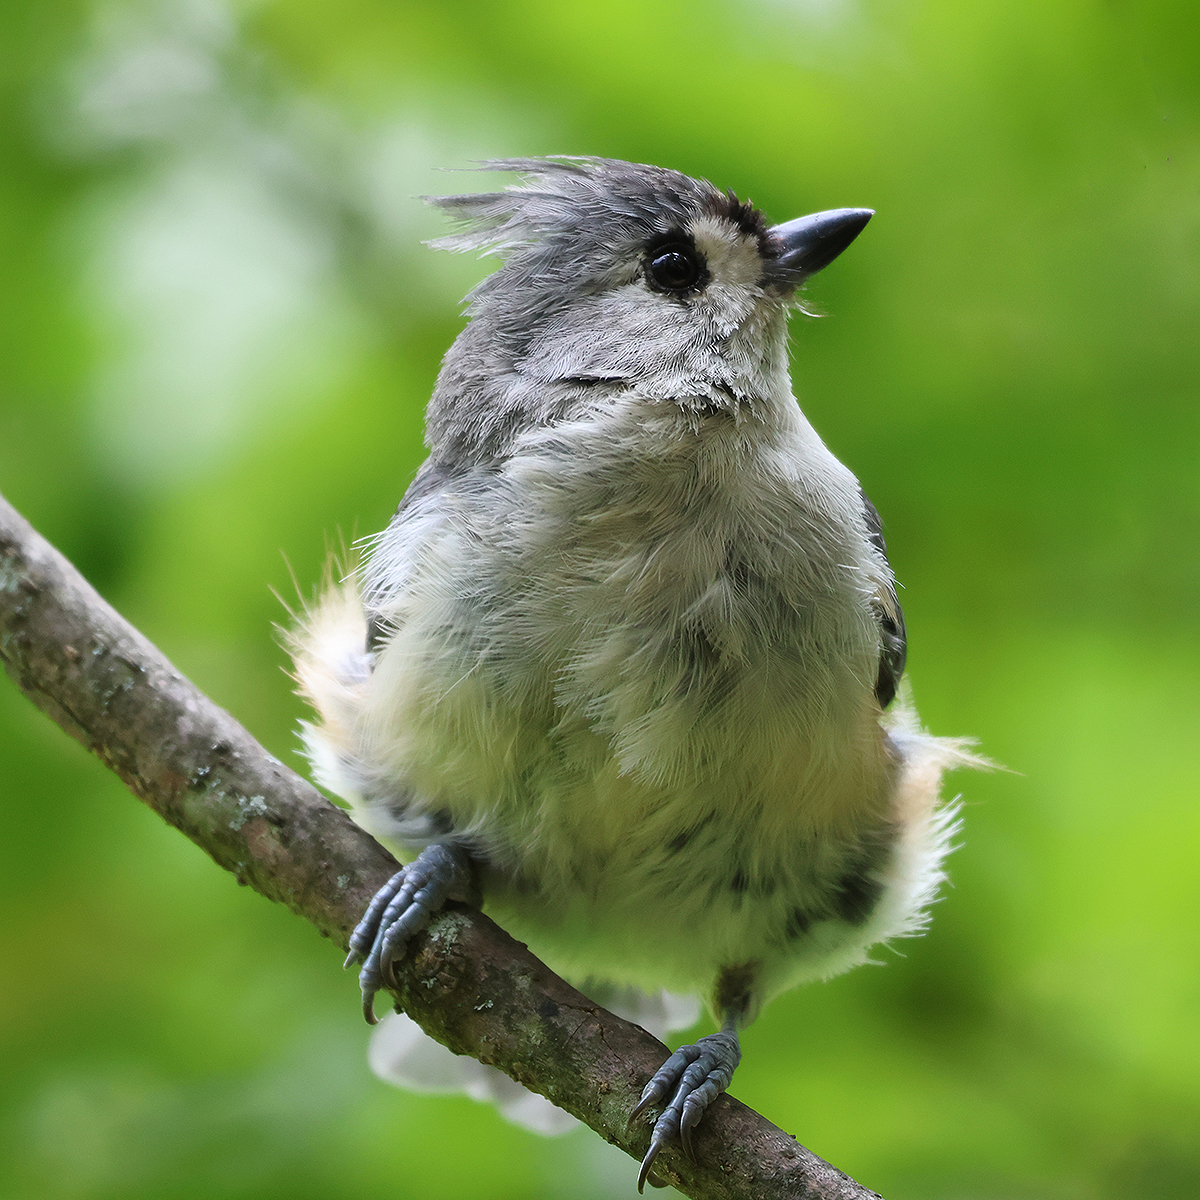 TUFTED TITMOUSE ABOUT TO LAUNCH